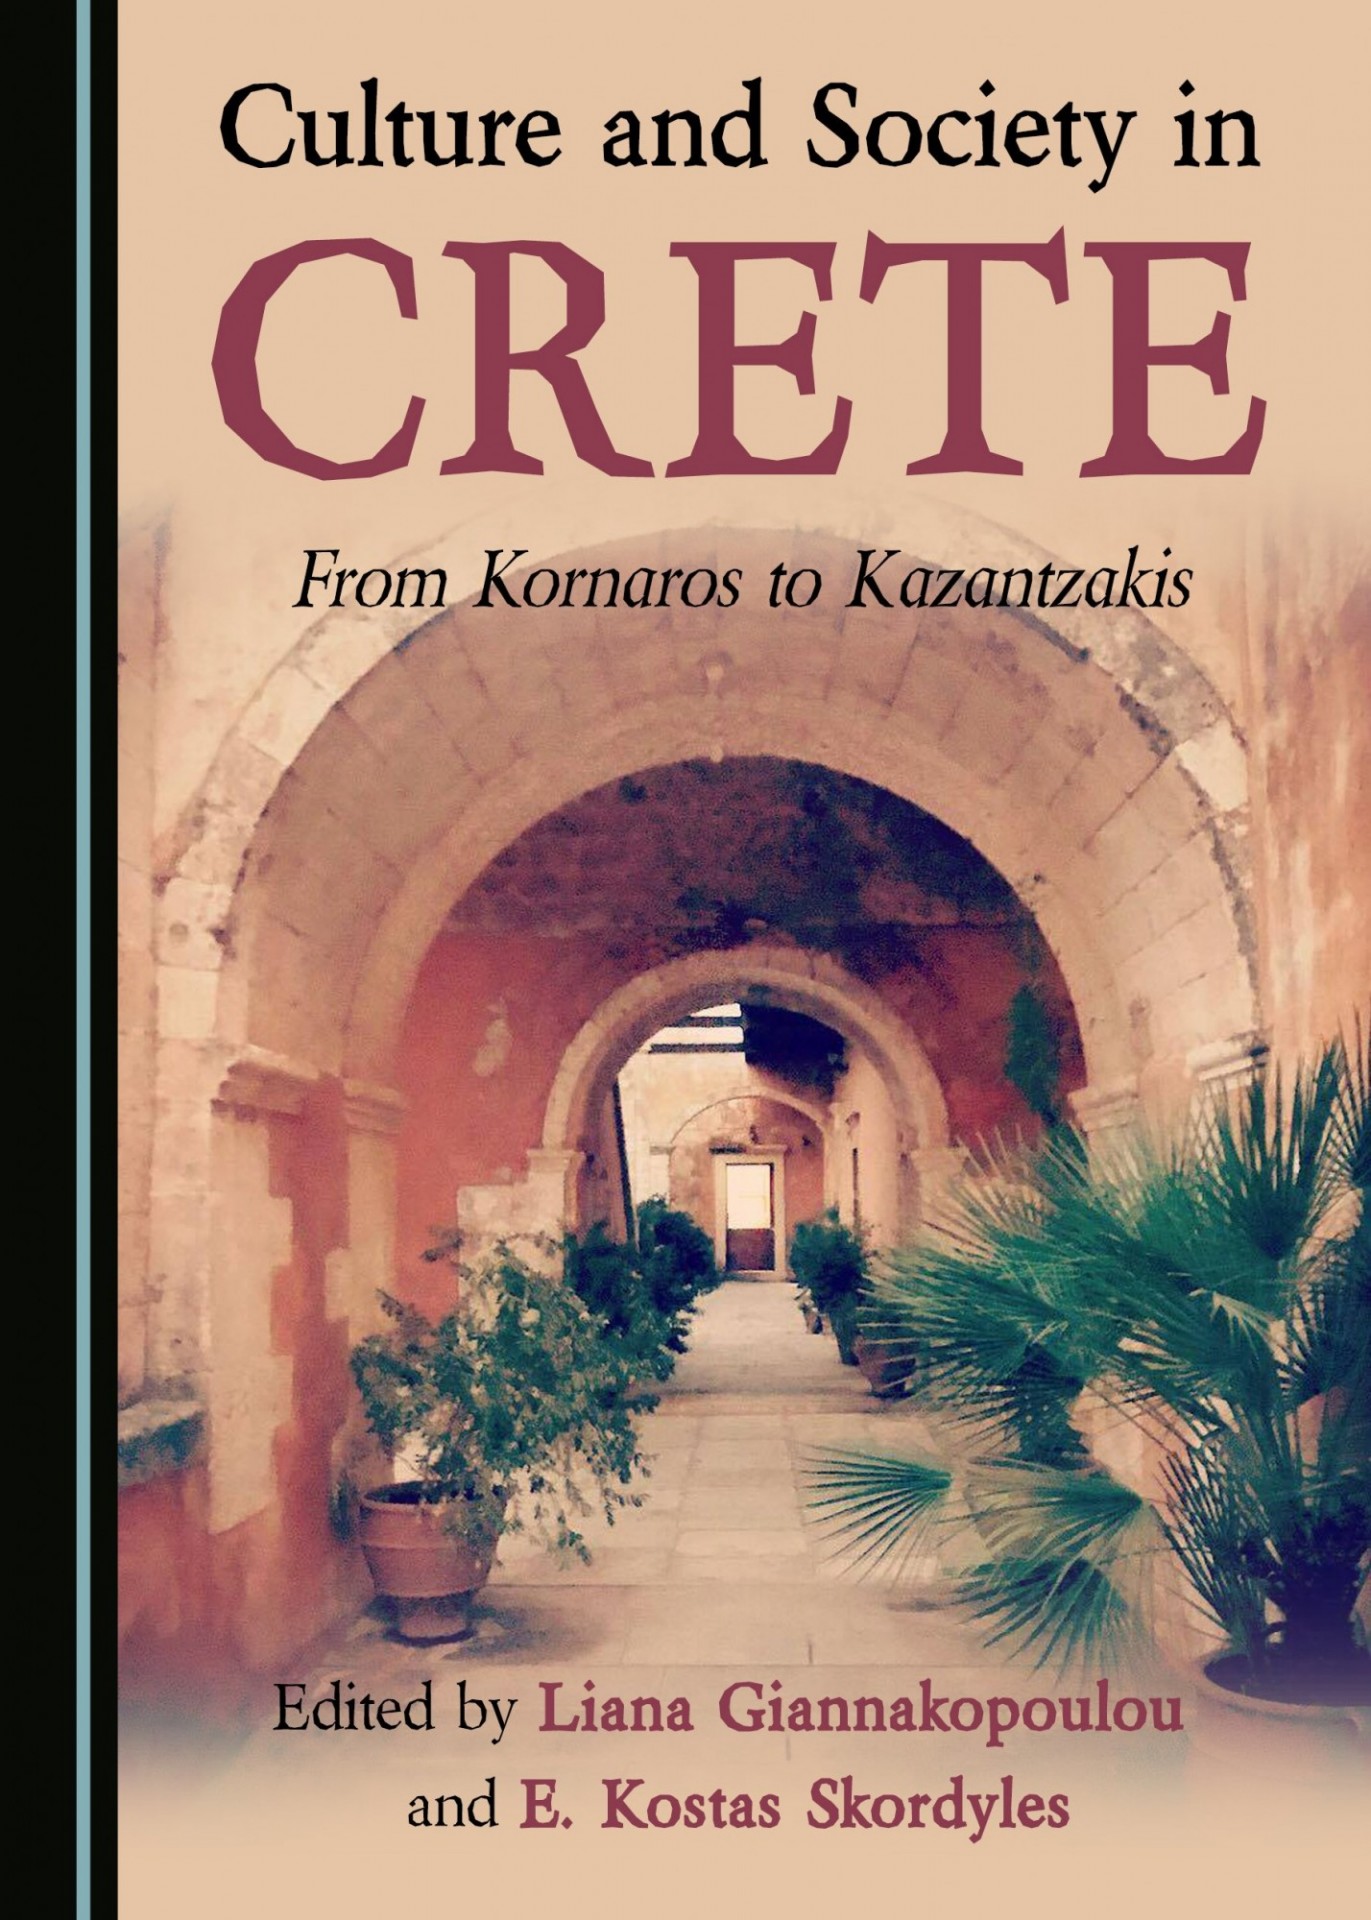 book cover image: Culture and Society in Crete From Kornaros to Kazantzakis